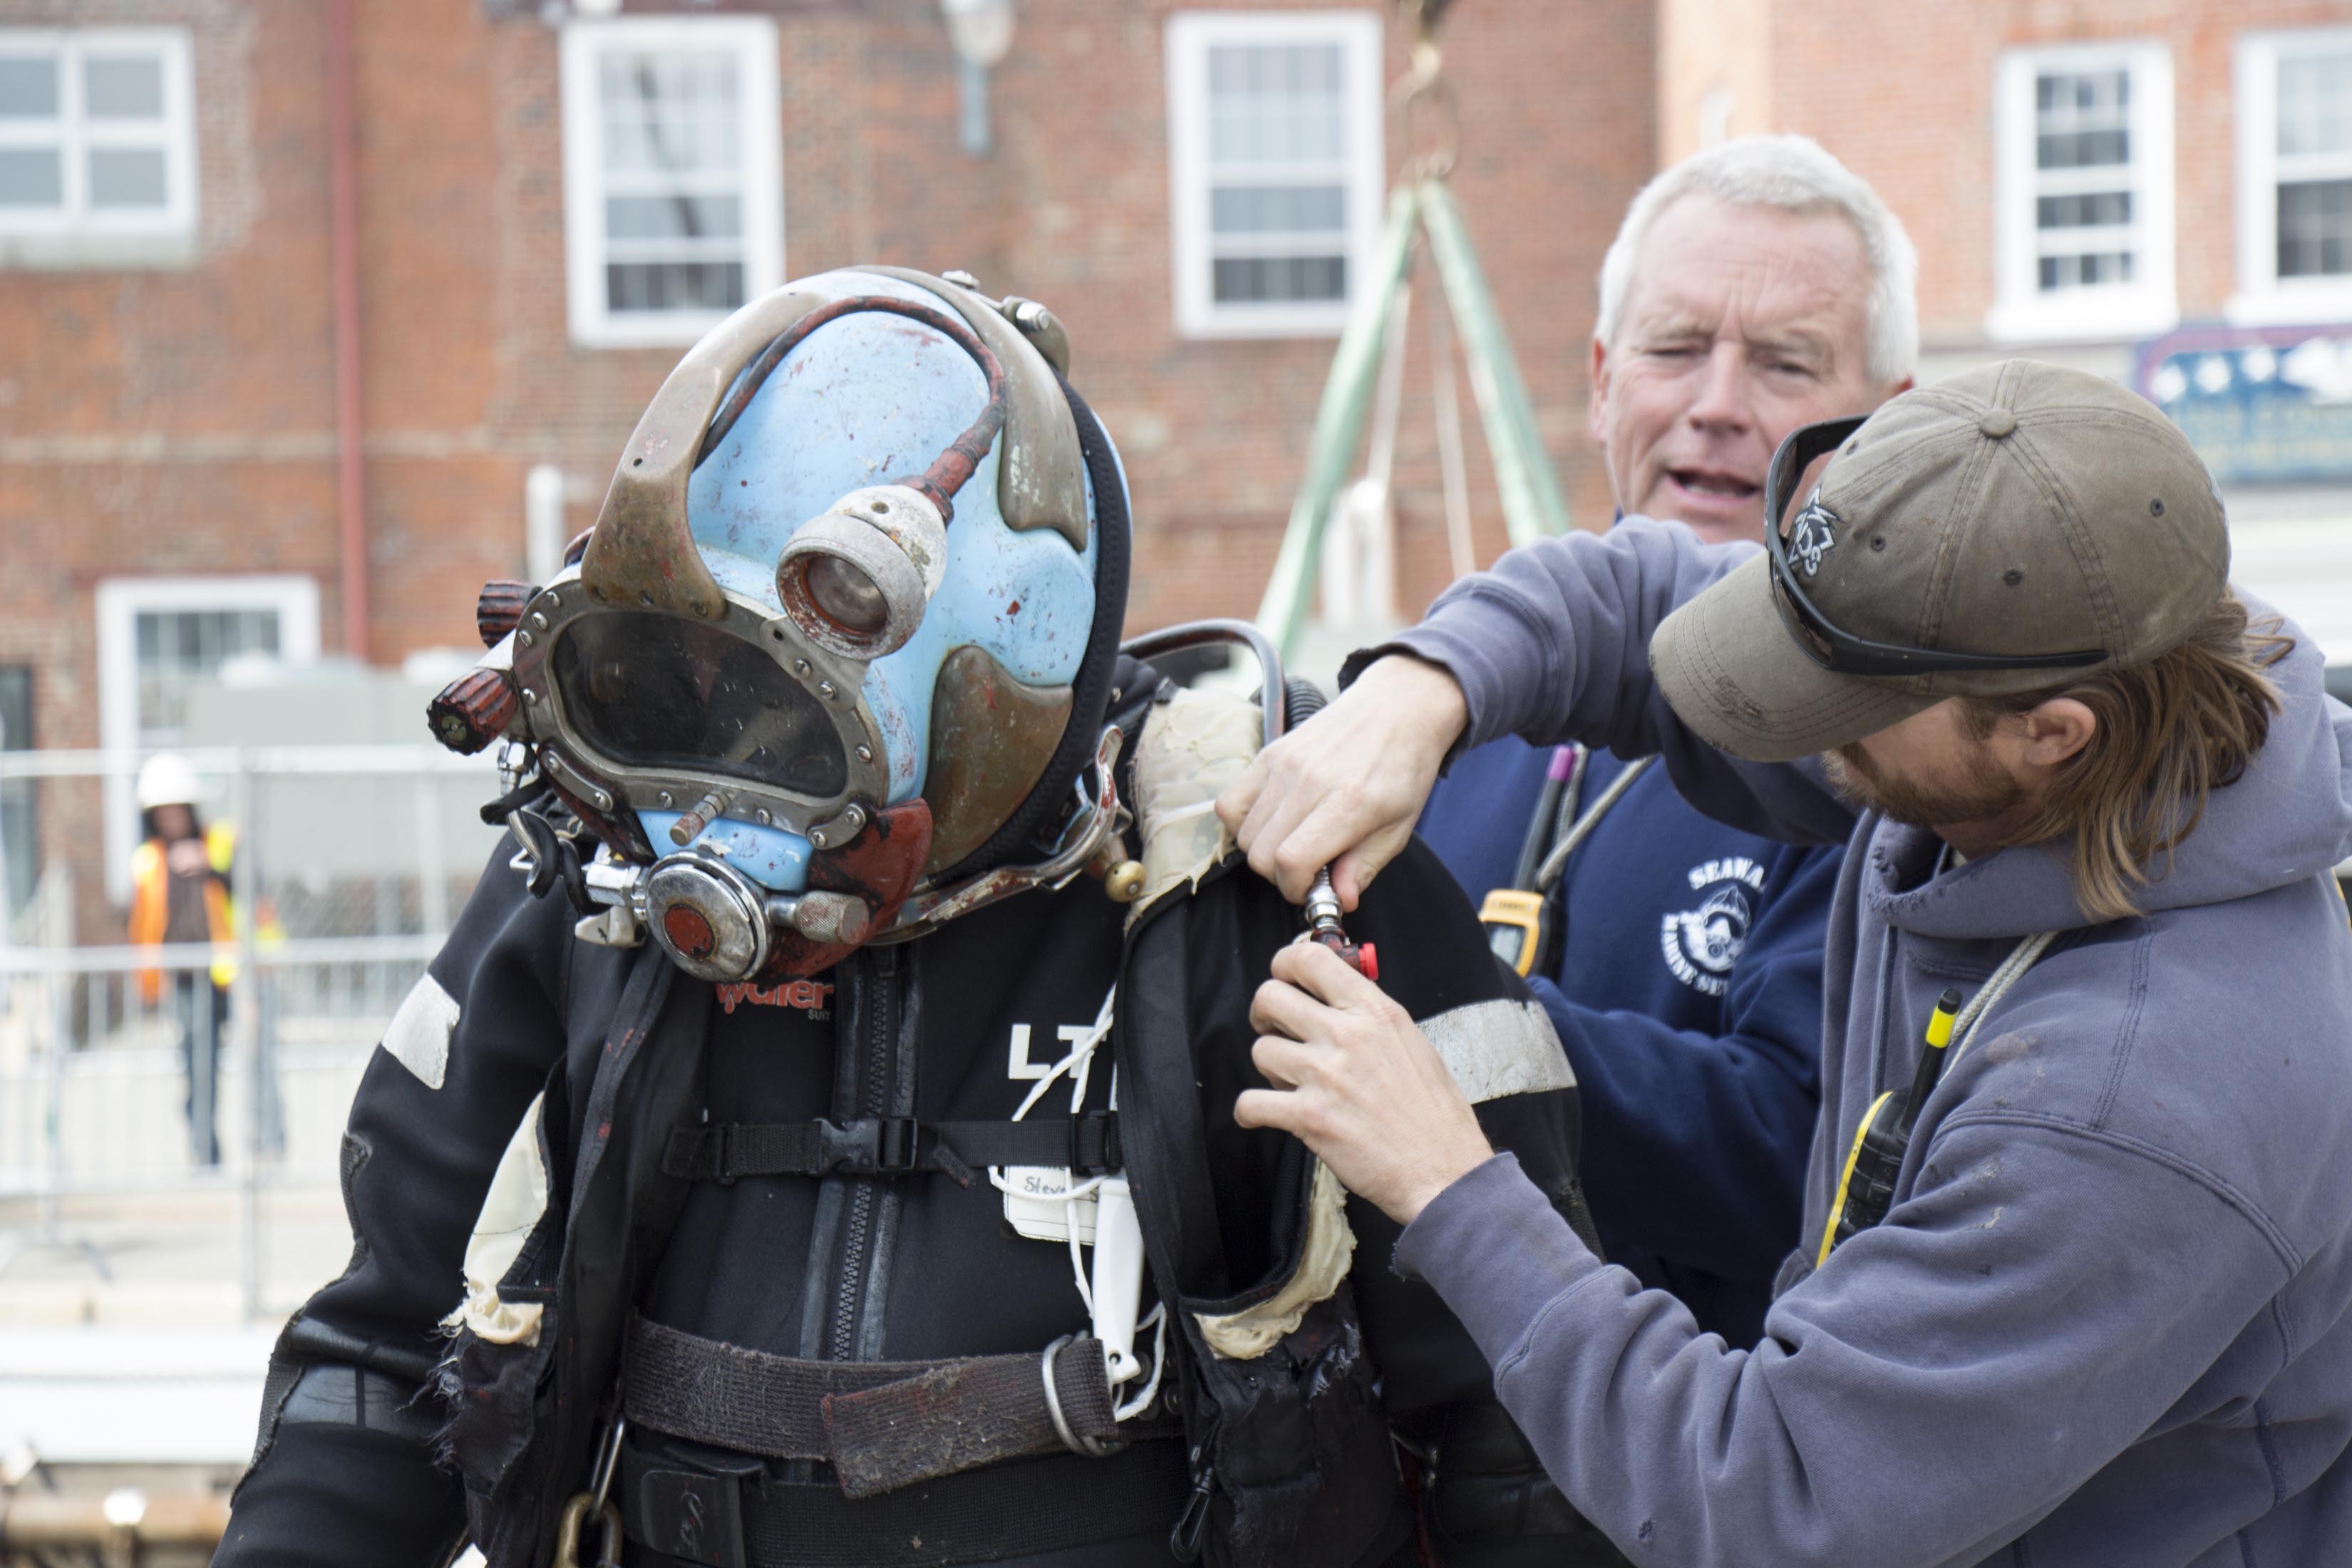 Employees of Seaward Marine Services, Inc. connect air and water tubes and communication wires to a diver's helmet, April 6, 2015. [Courtesy USS Constitution Museum]